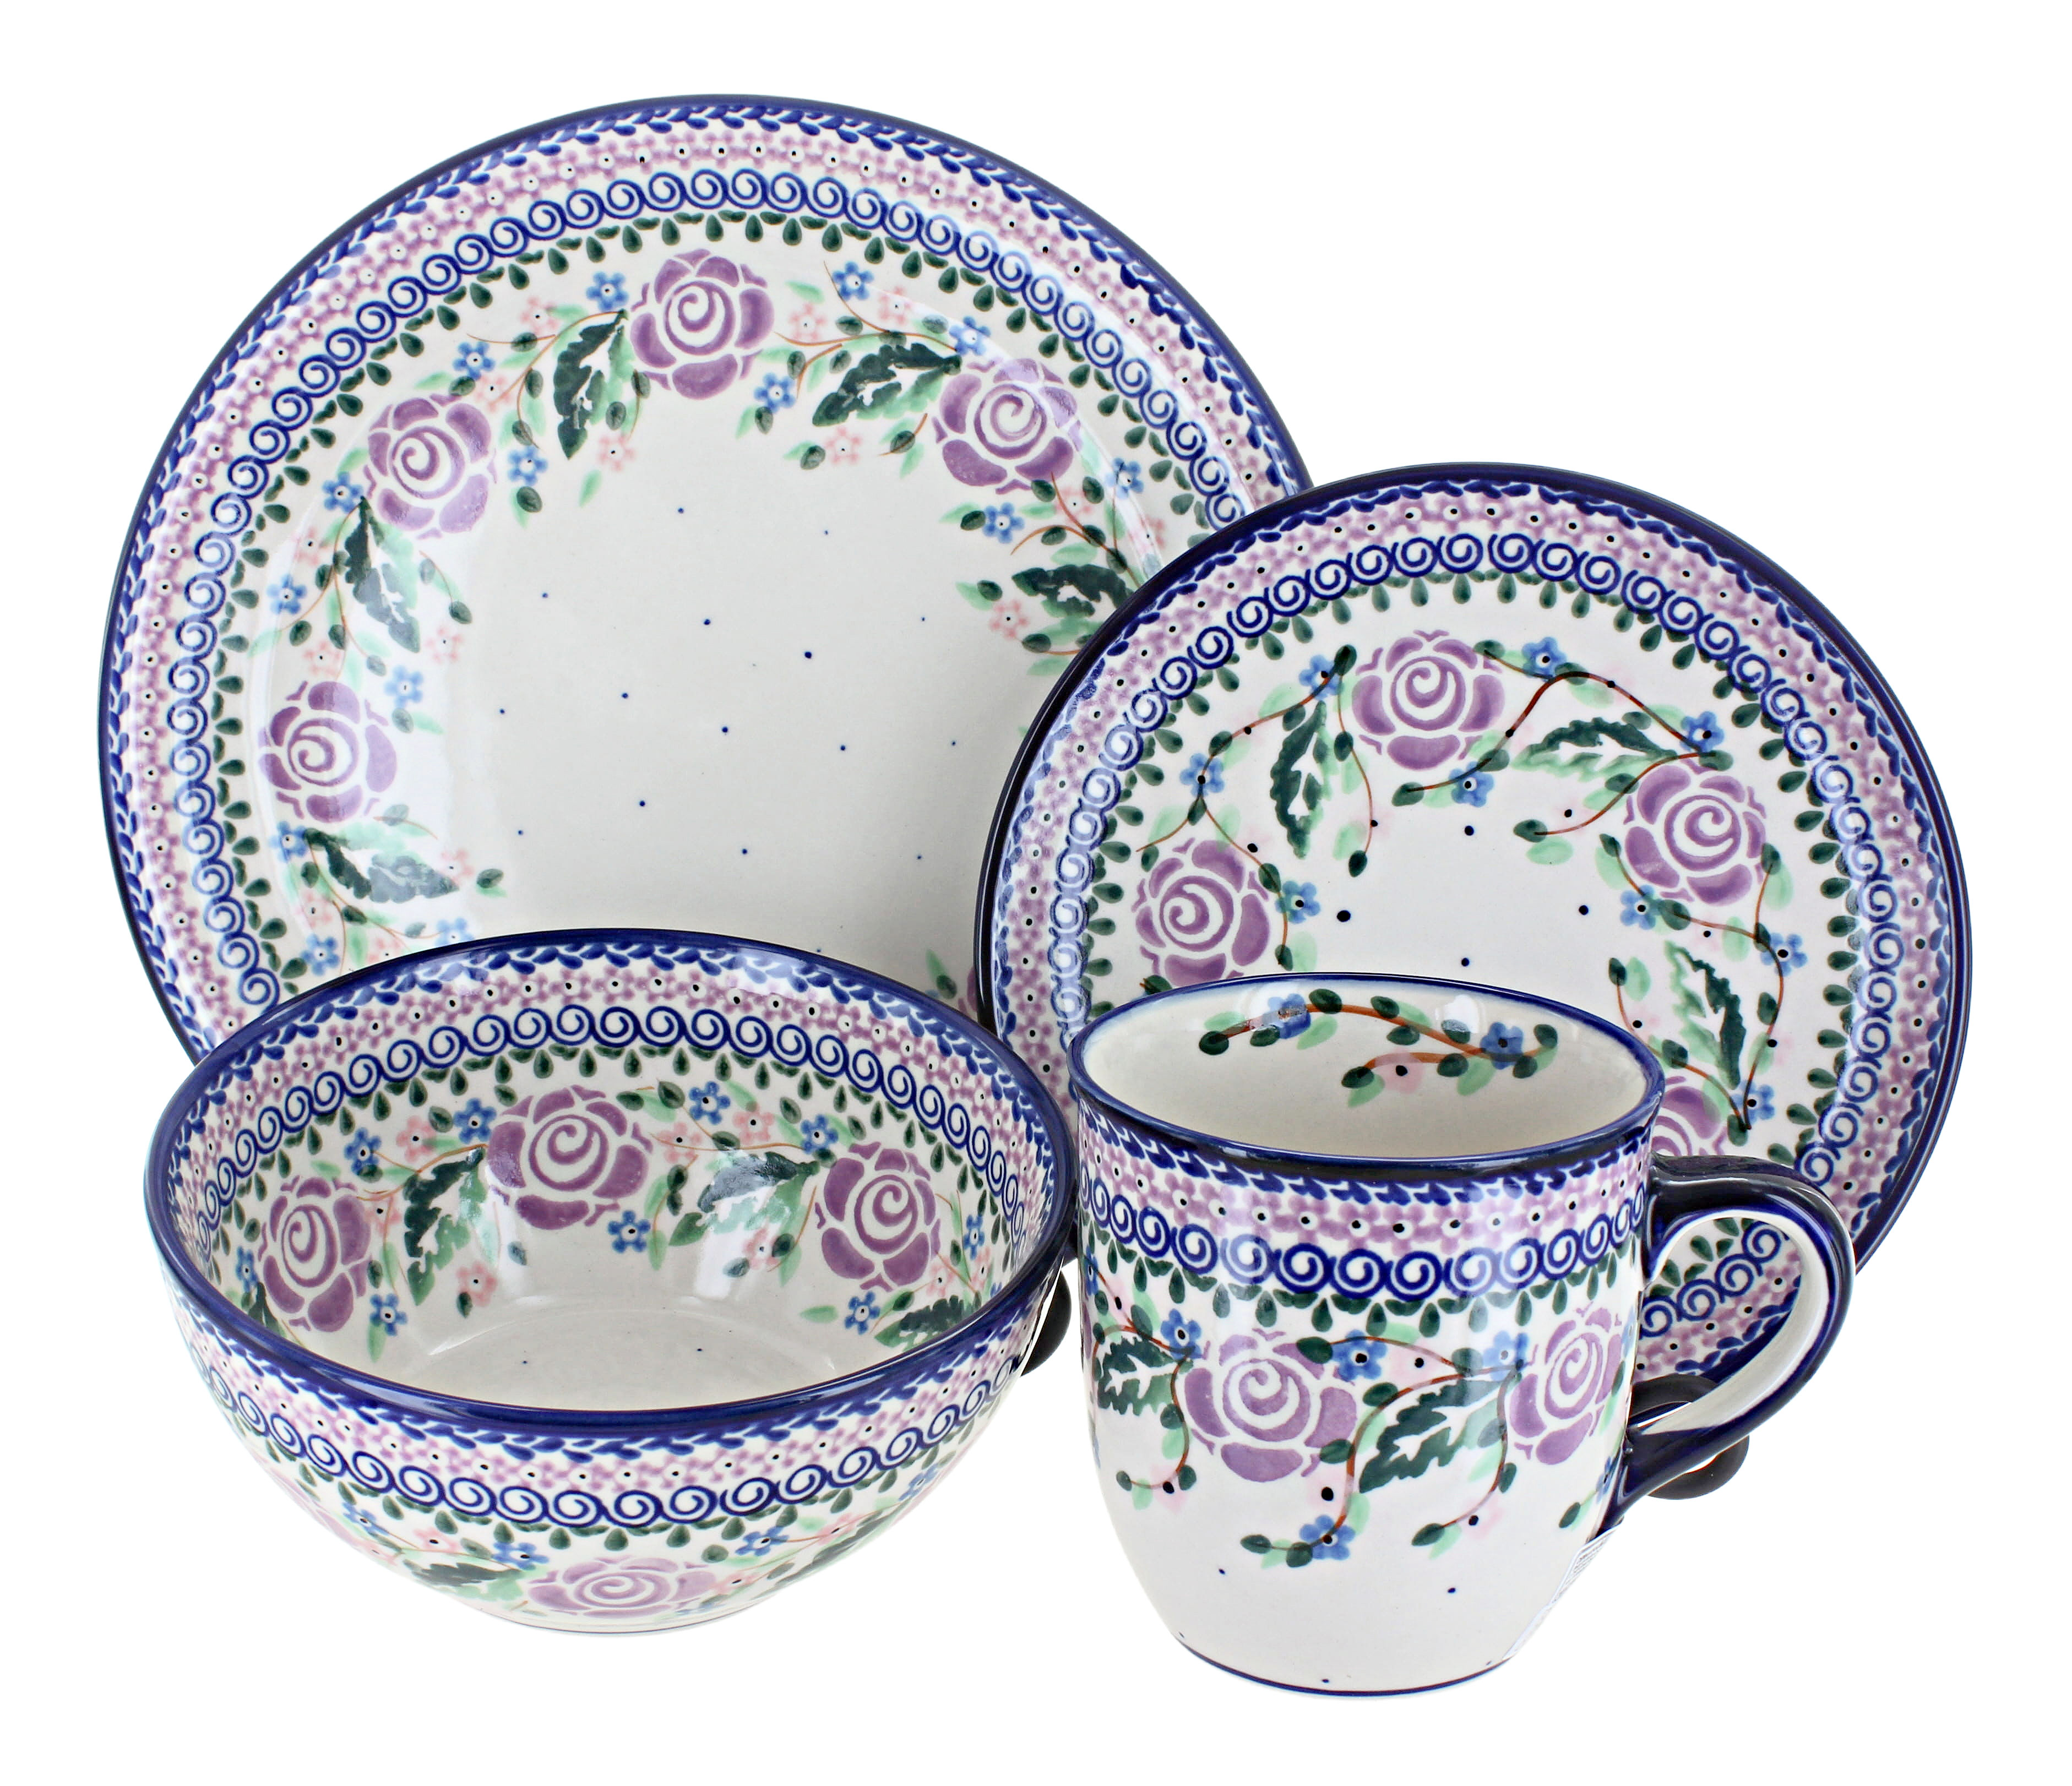 Blue Rose Polish Pottery | Forever Rose 4 Piece Place Setting Service for 1